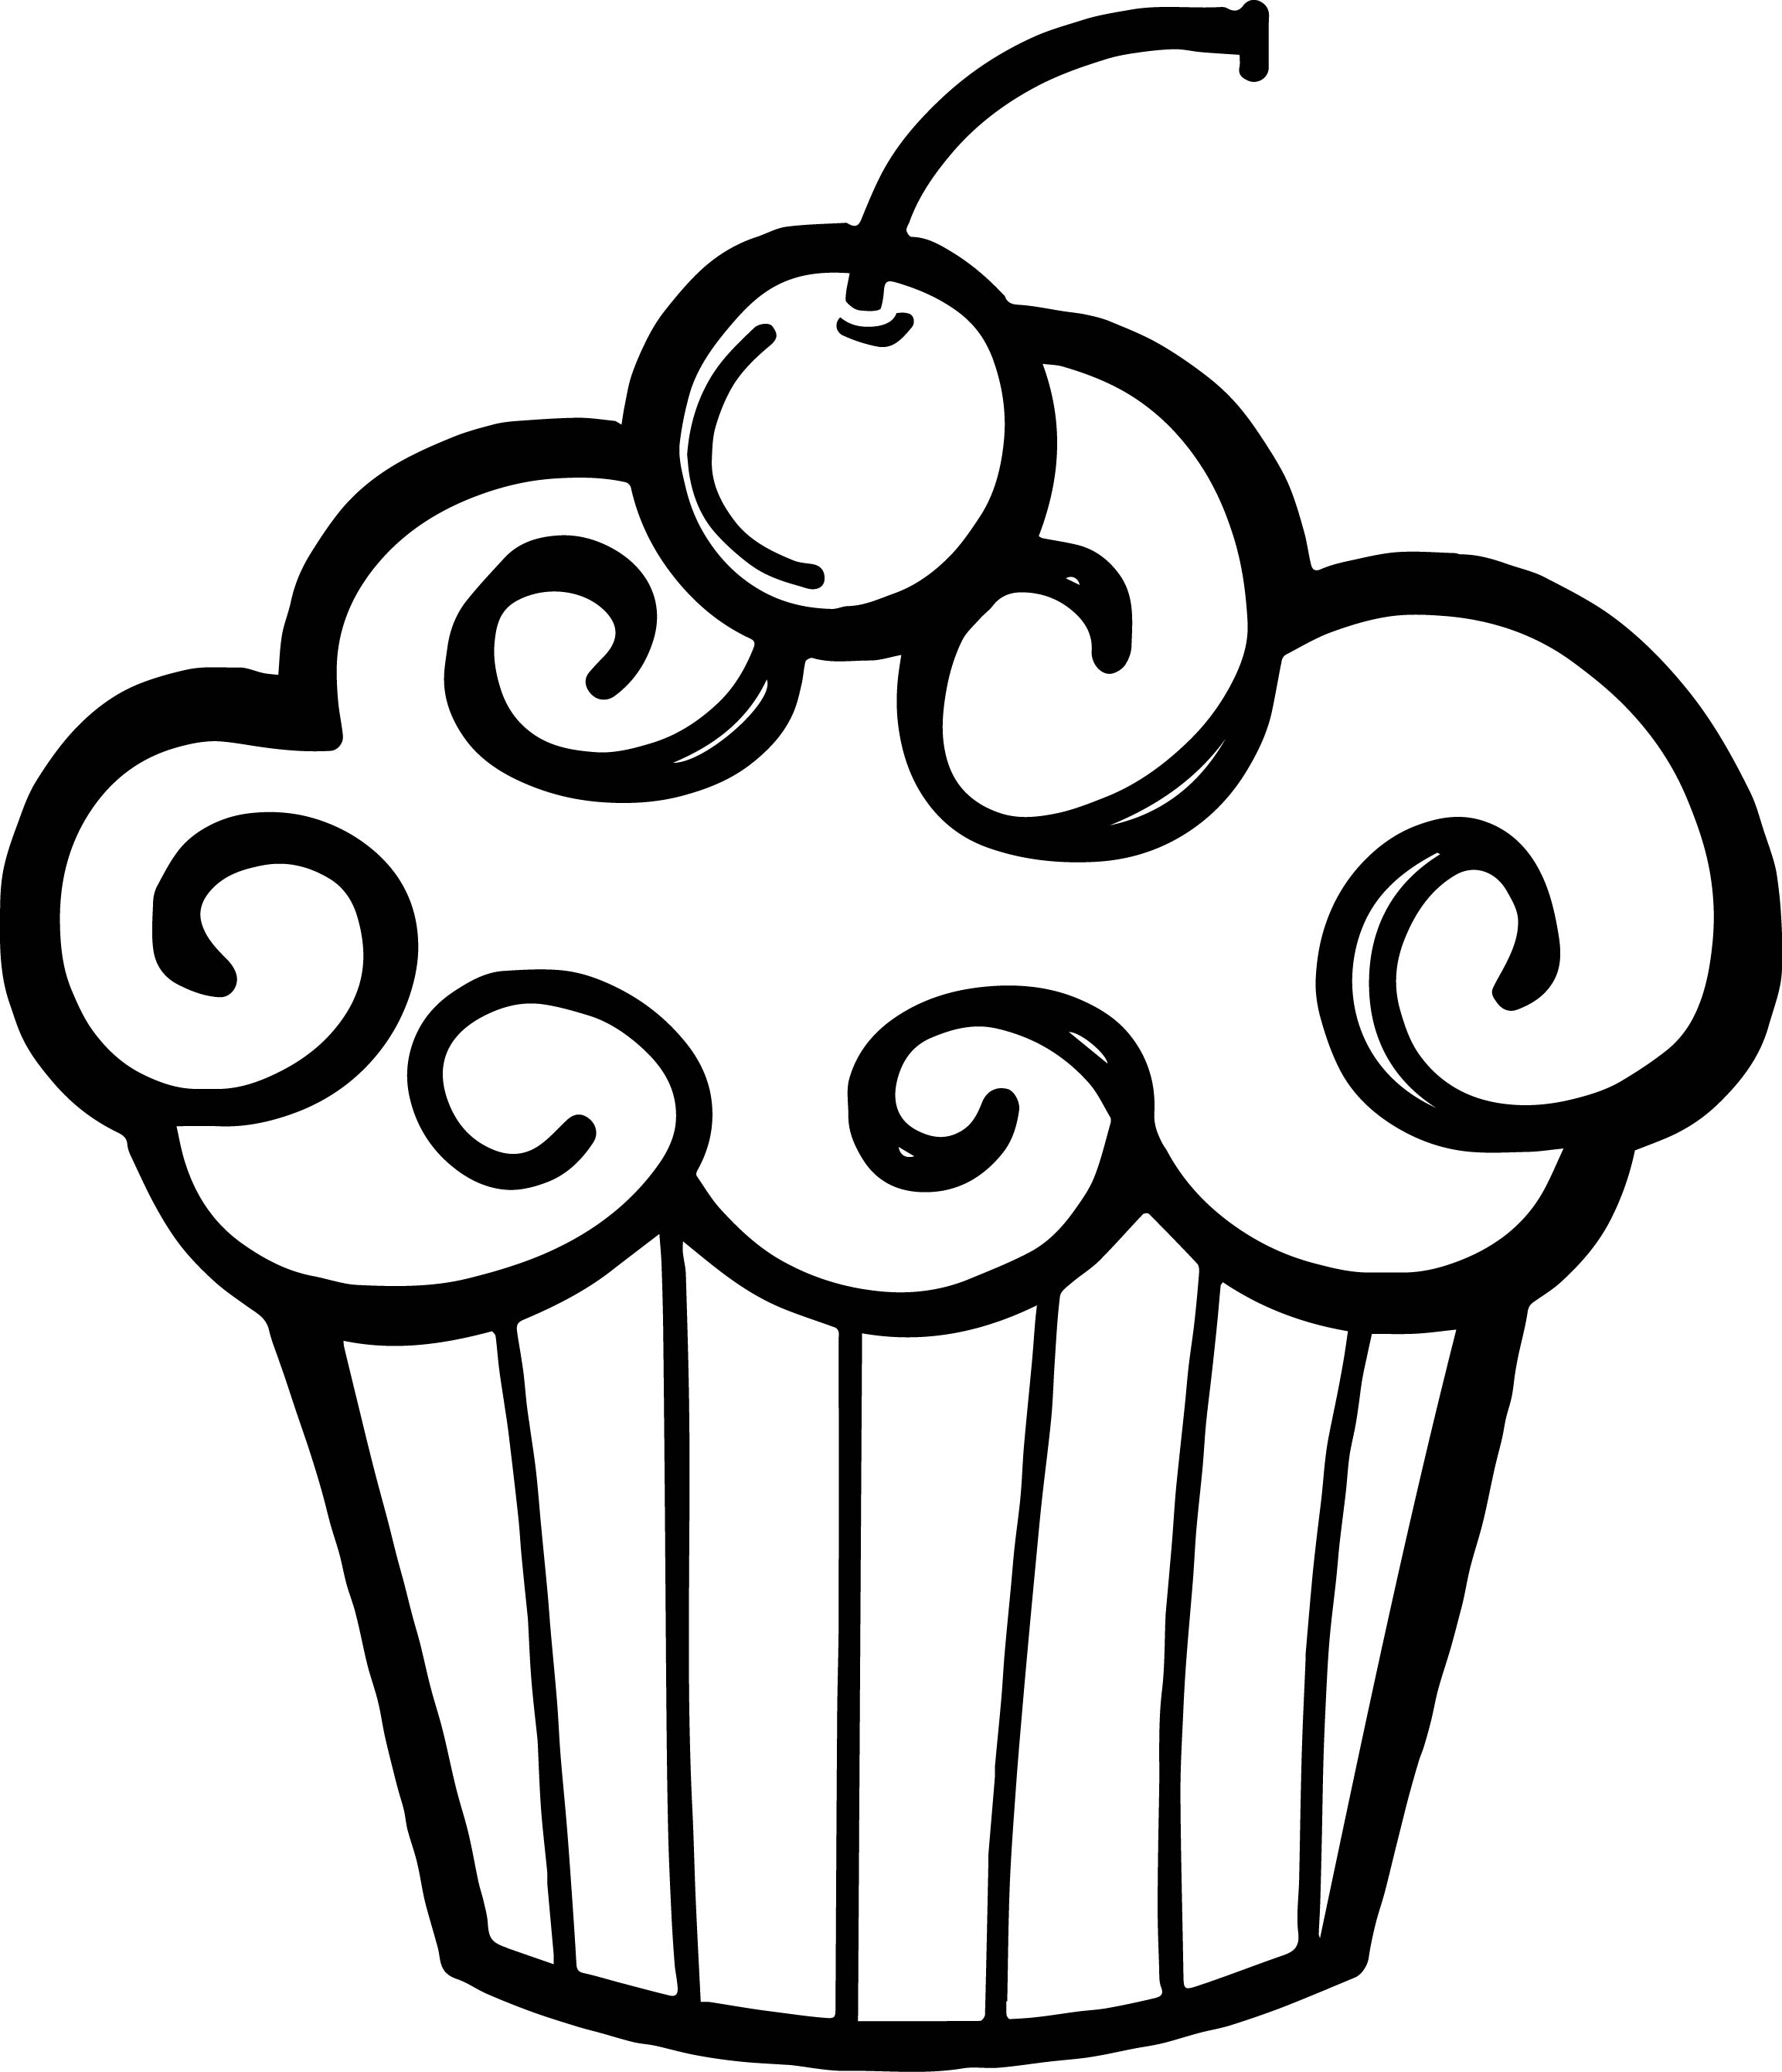 Free Black And White Dessert Clipart, Download Free Black And White